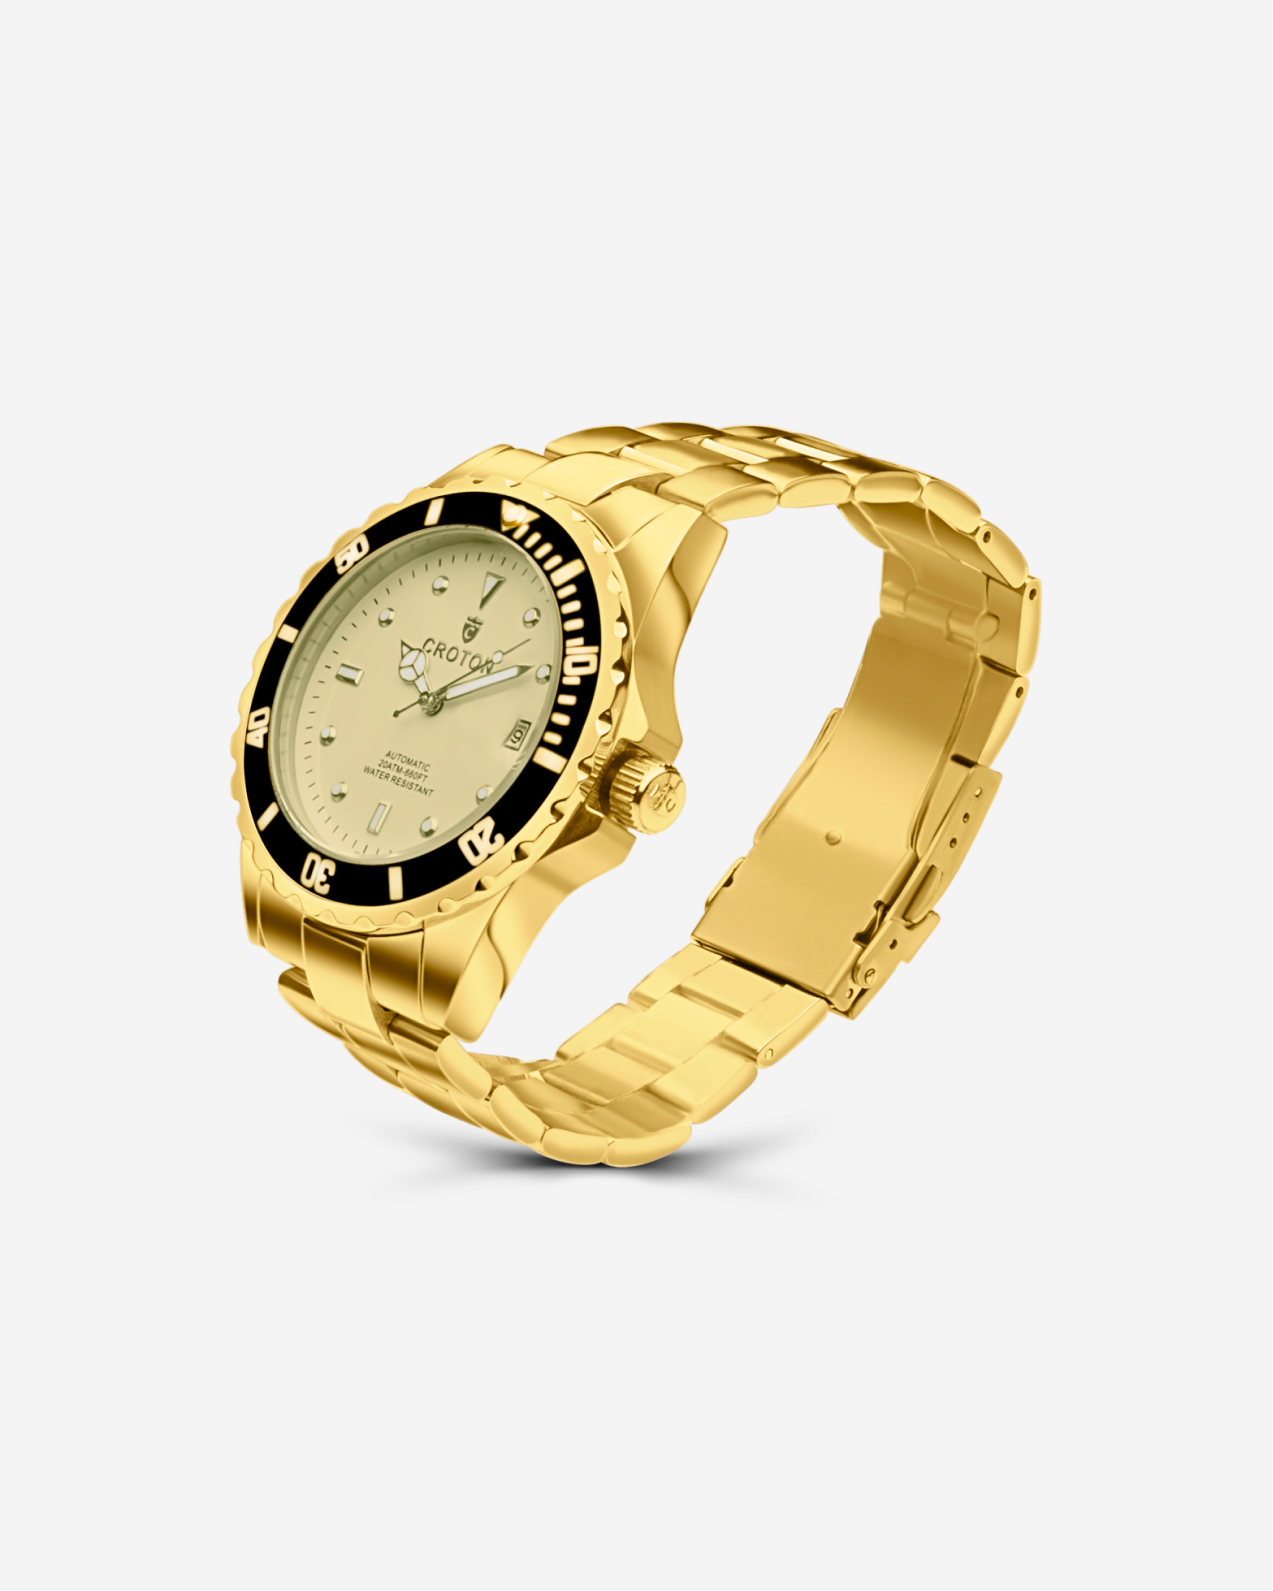 #style_goldtone champagne dial